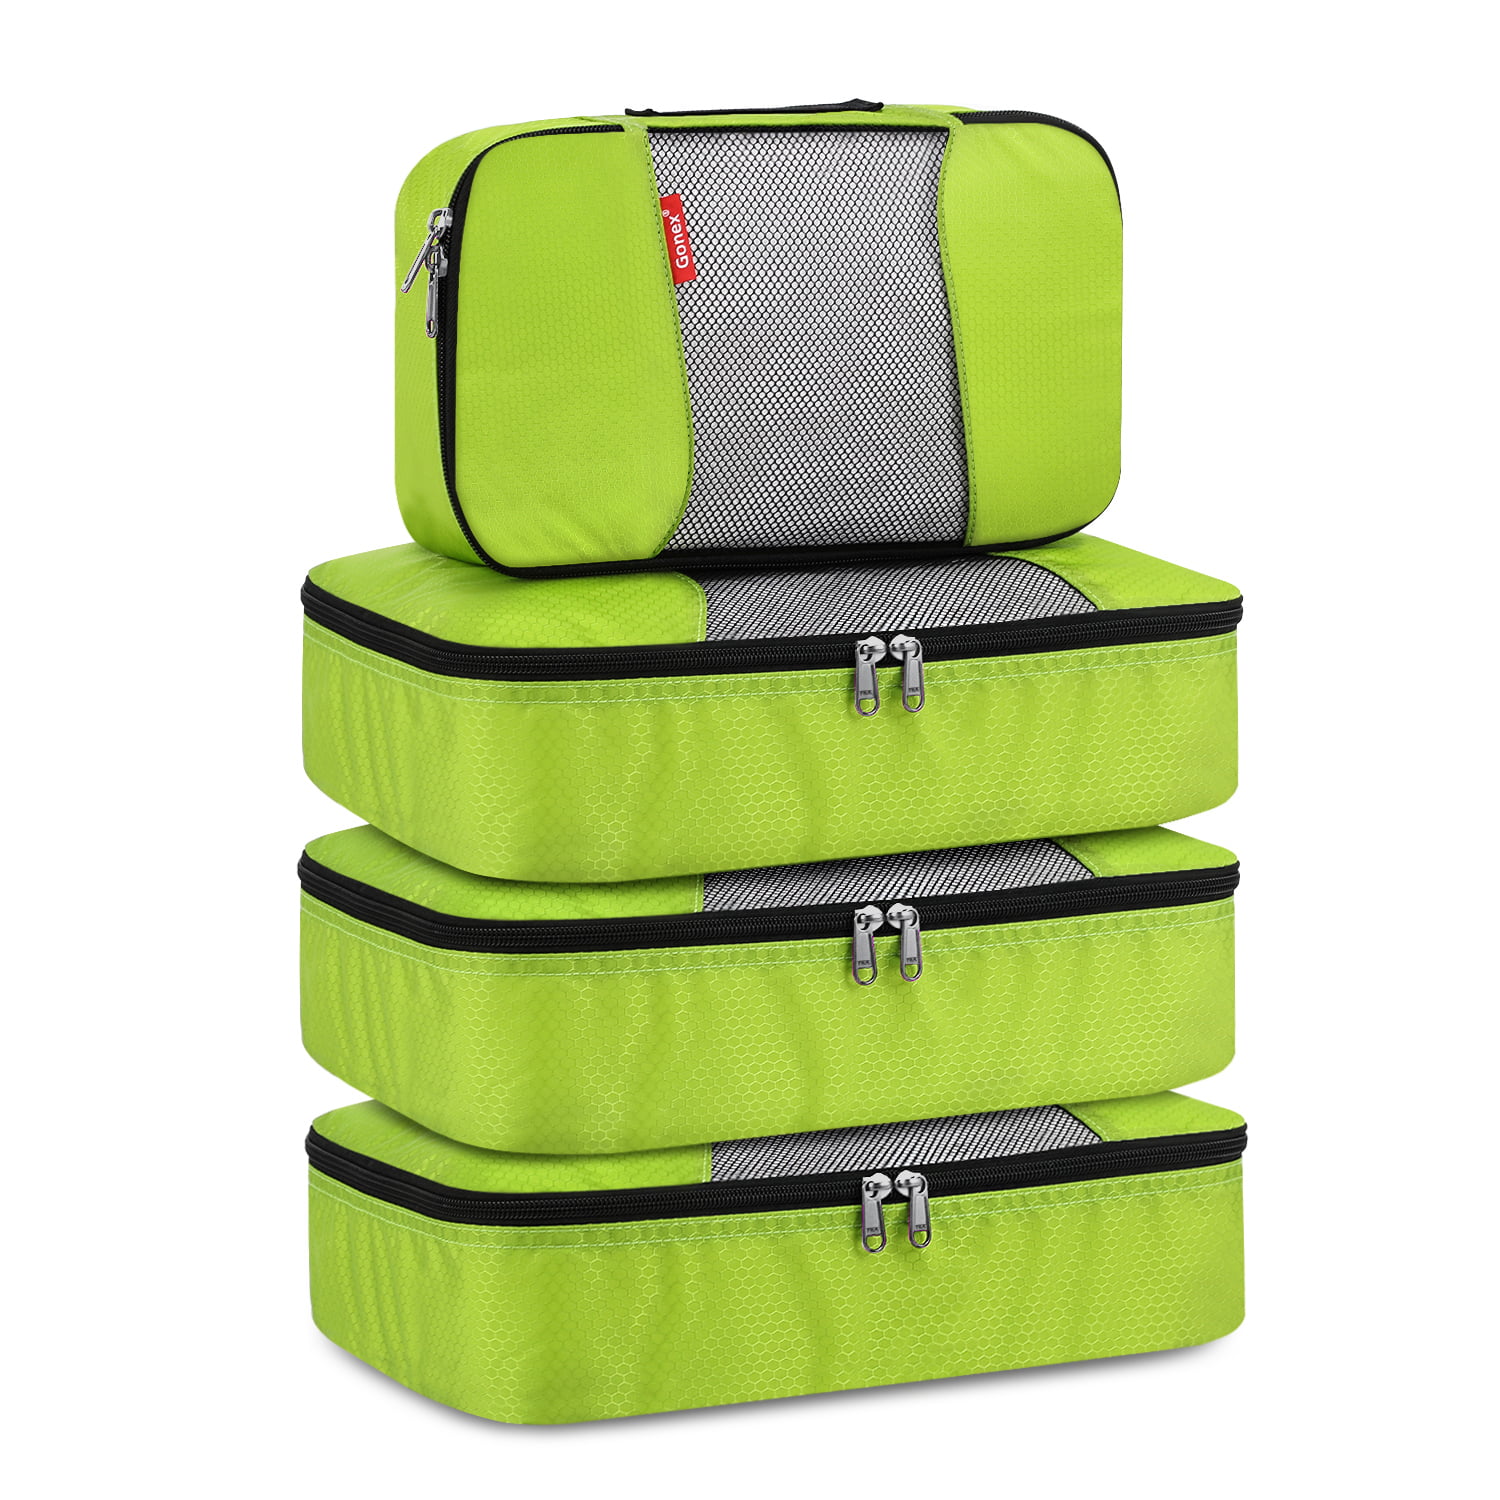 Gonex Packing Cubes Travel Luggage Organizers Different Set 3 Medium+1 Small Green 